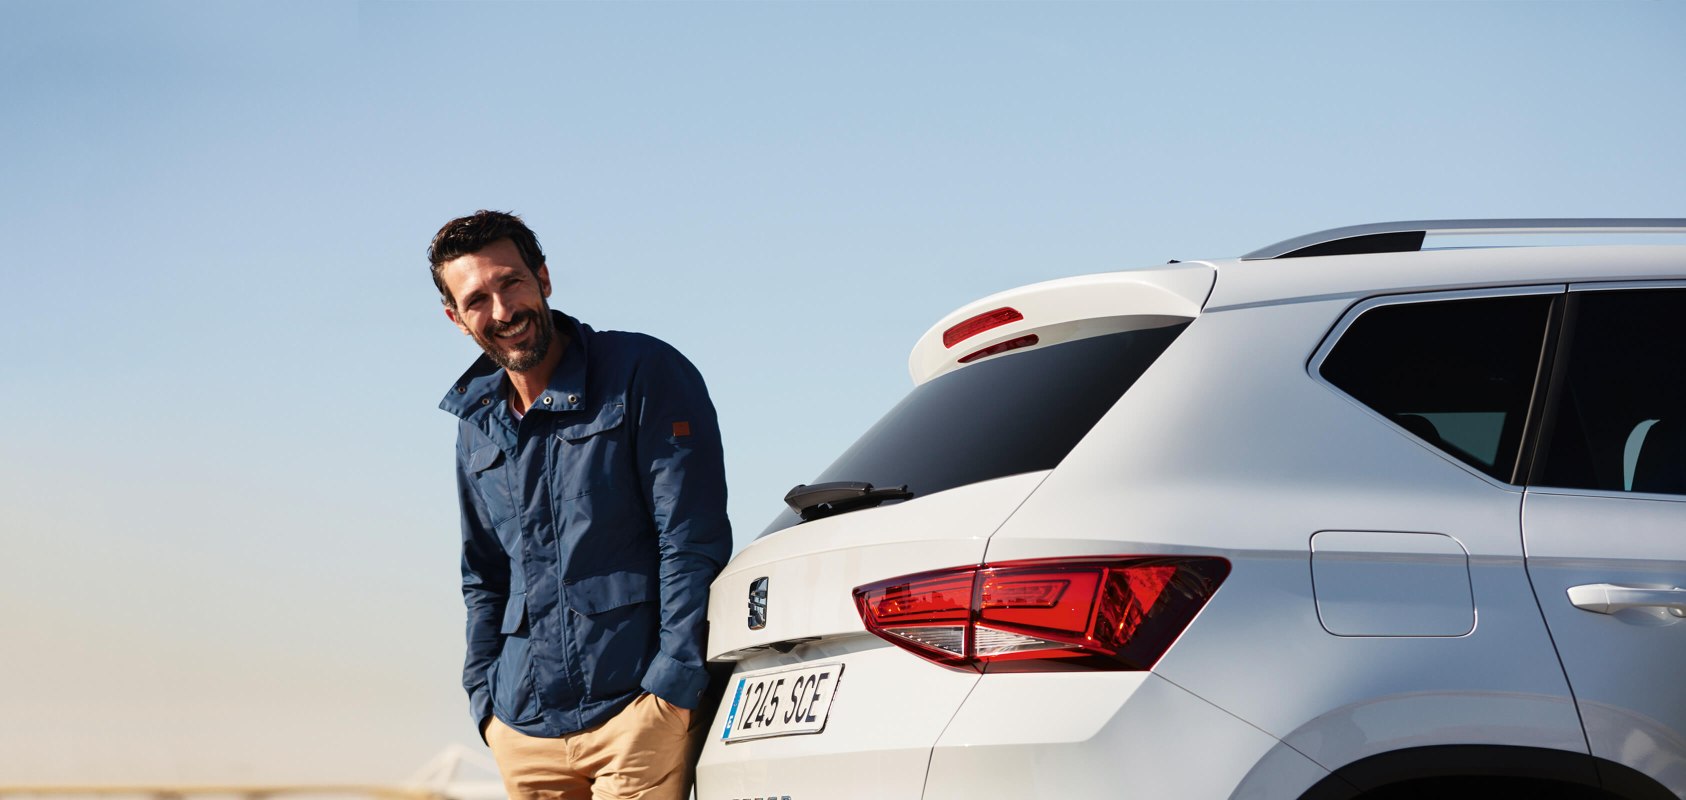 SEAT new car services and maintenance – Man standing behind admiring the SUV SEAT Ateca